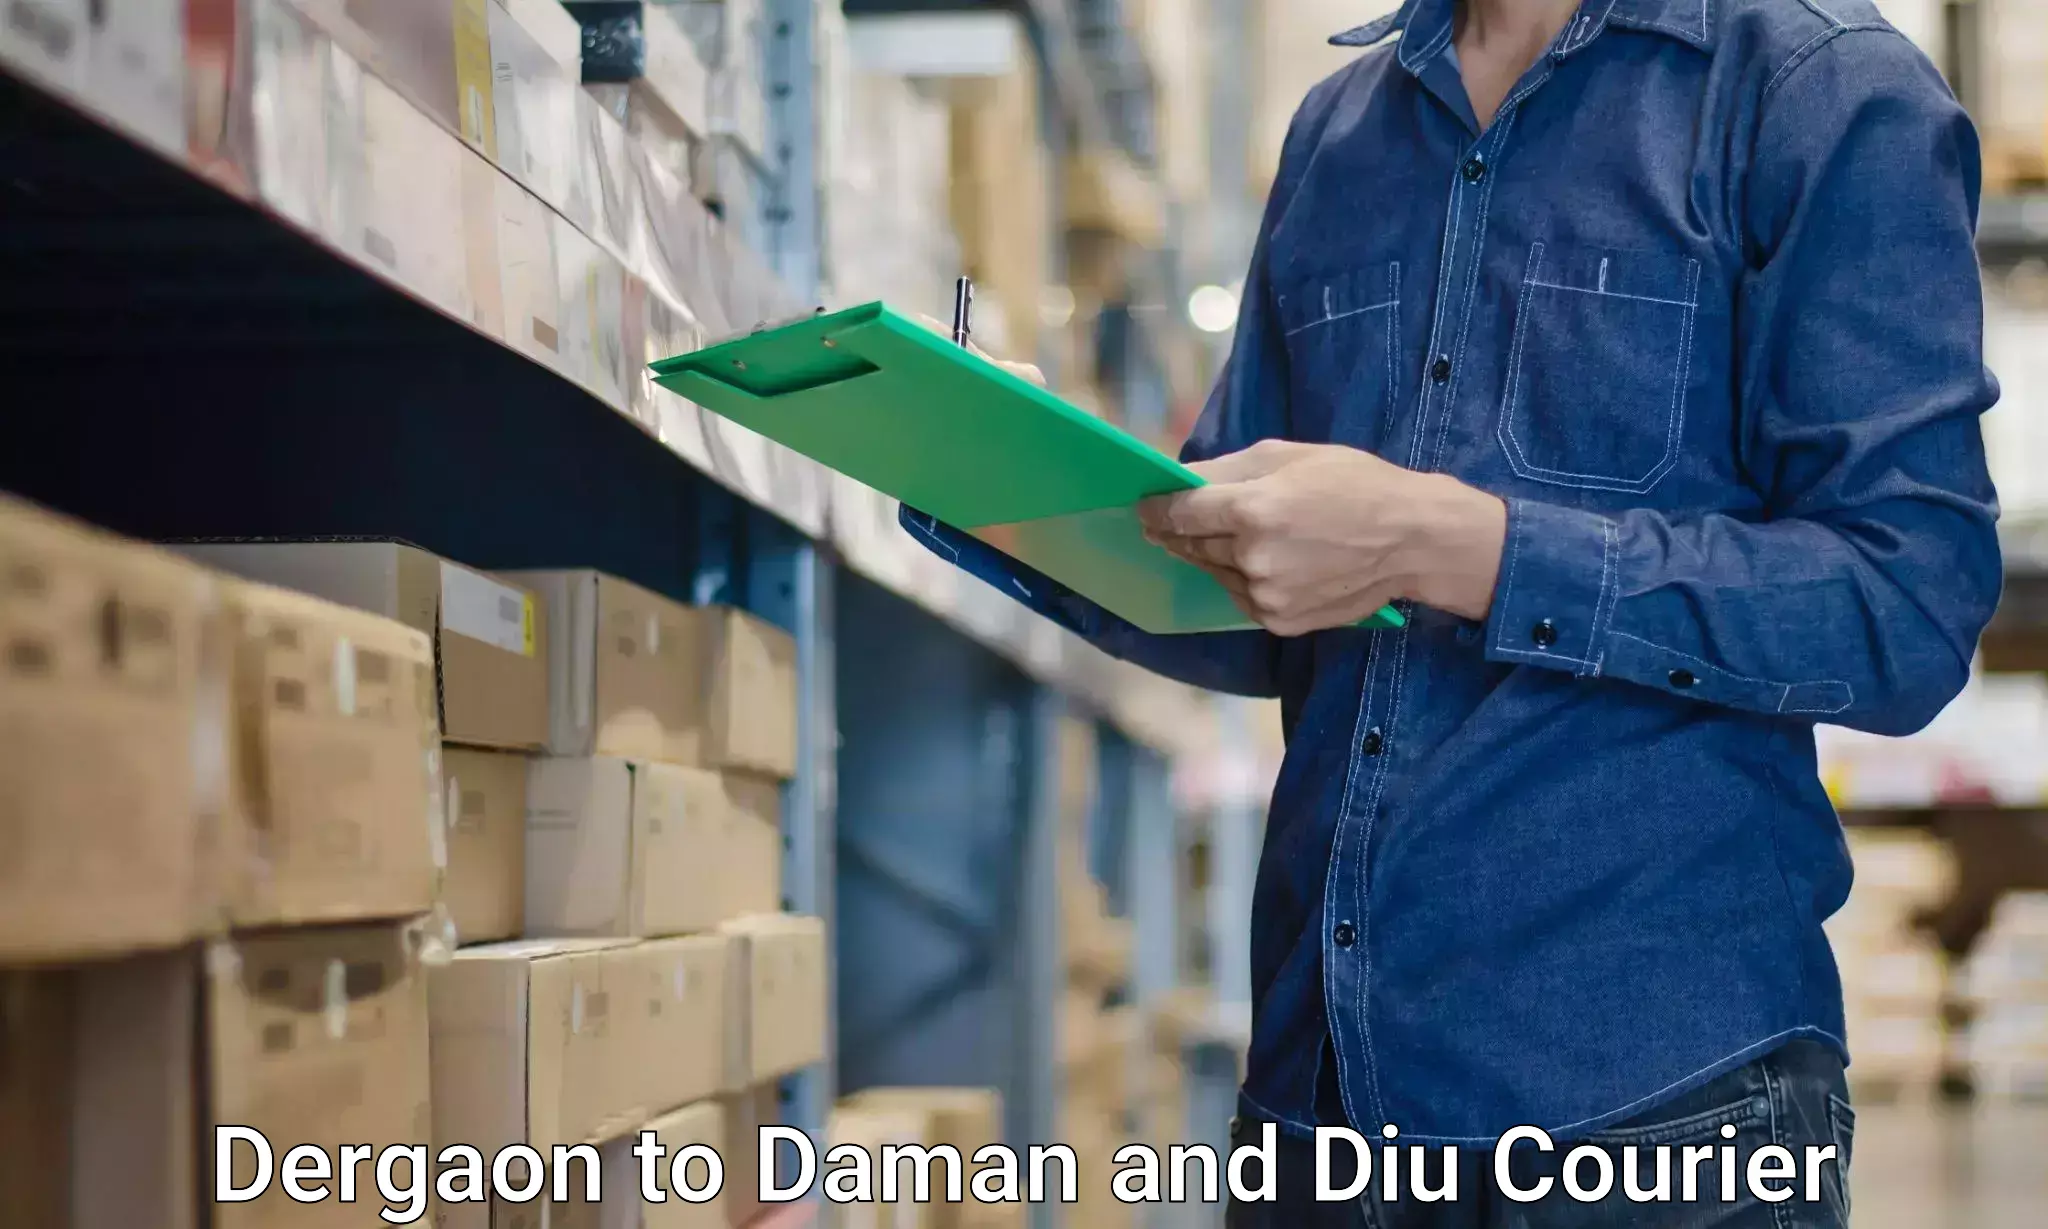 Home moving experts Dergaon to Daman and Diu